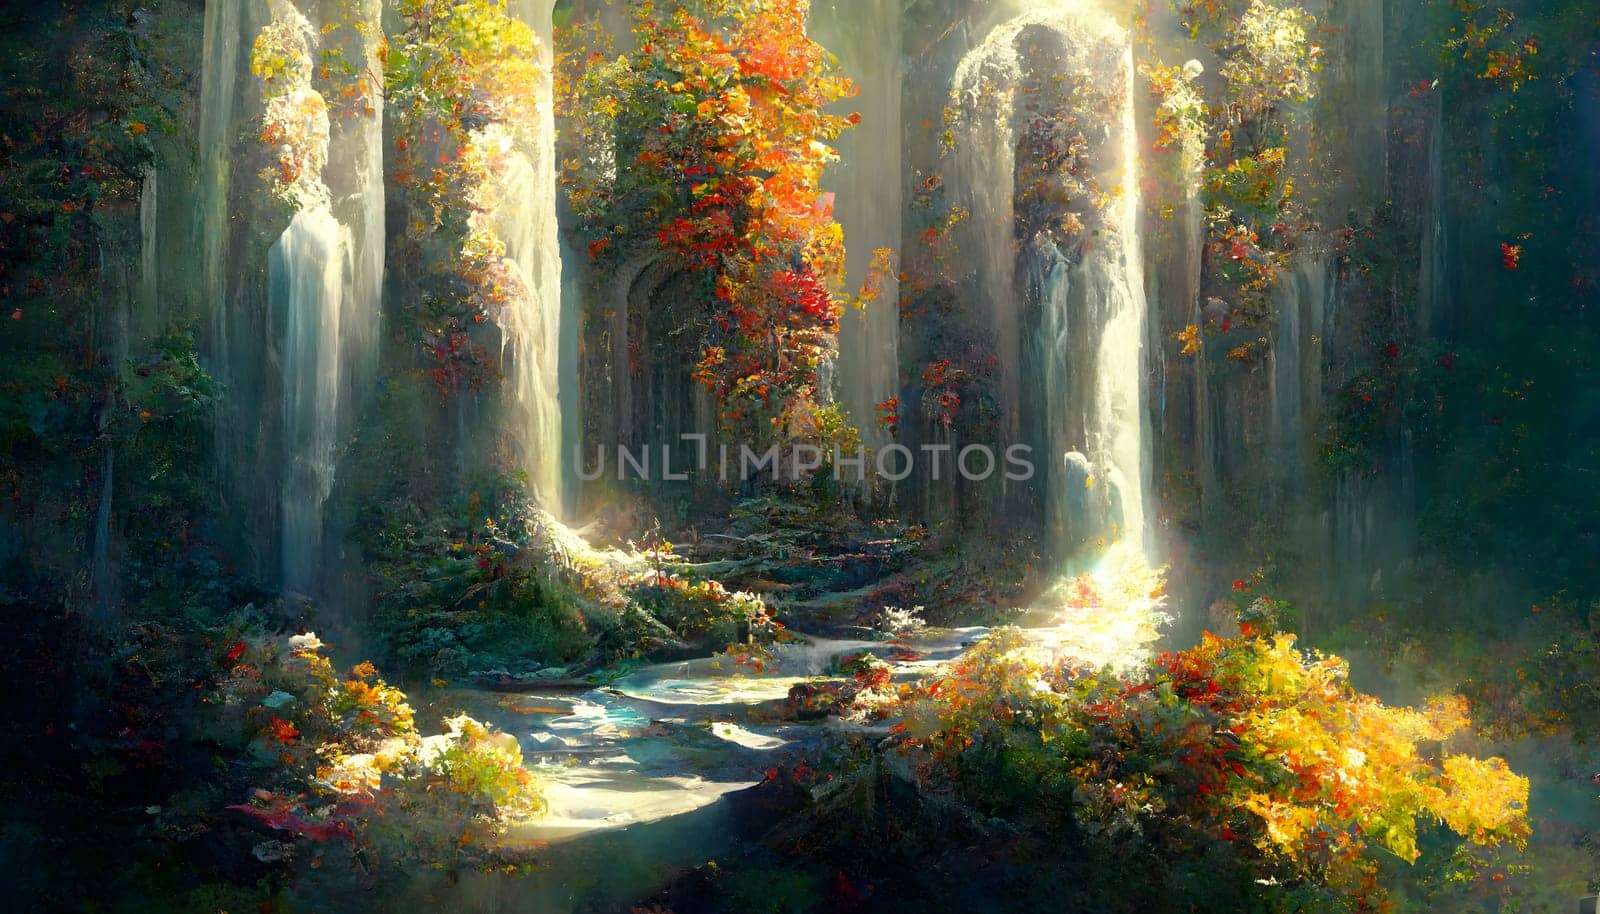 fantasy autumn waterfalls scenery at sunny day, neural network generated art by z1b